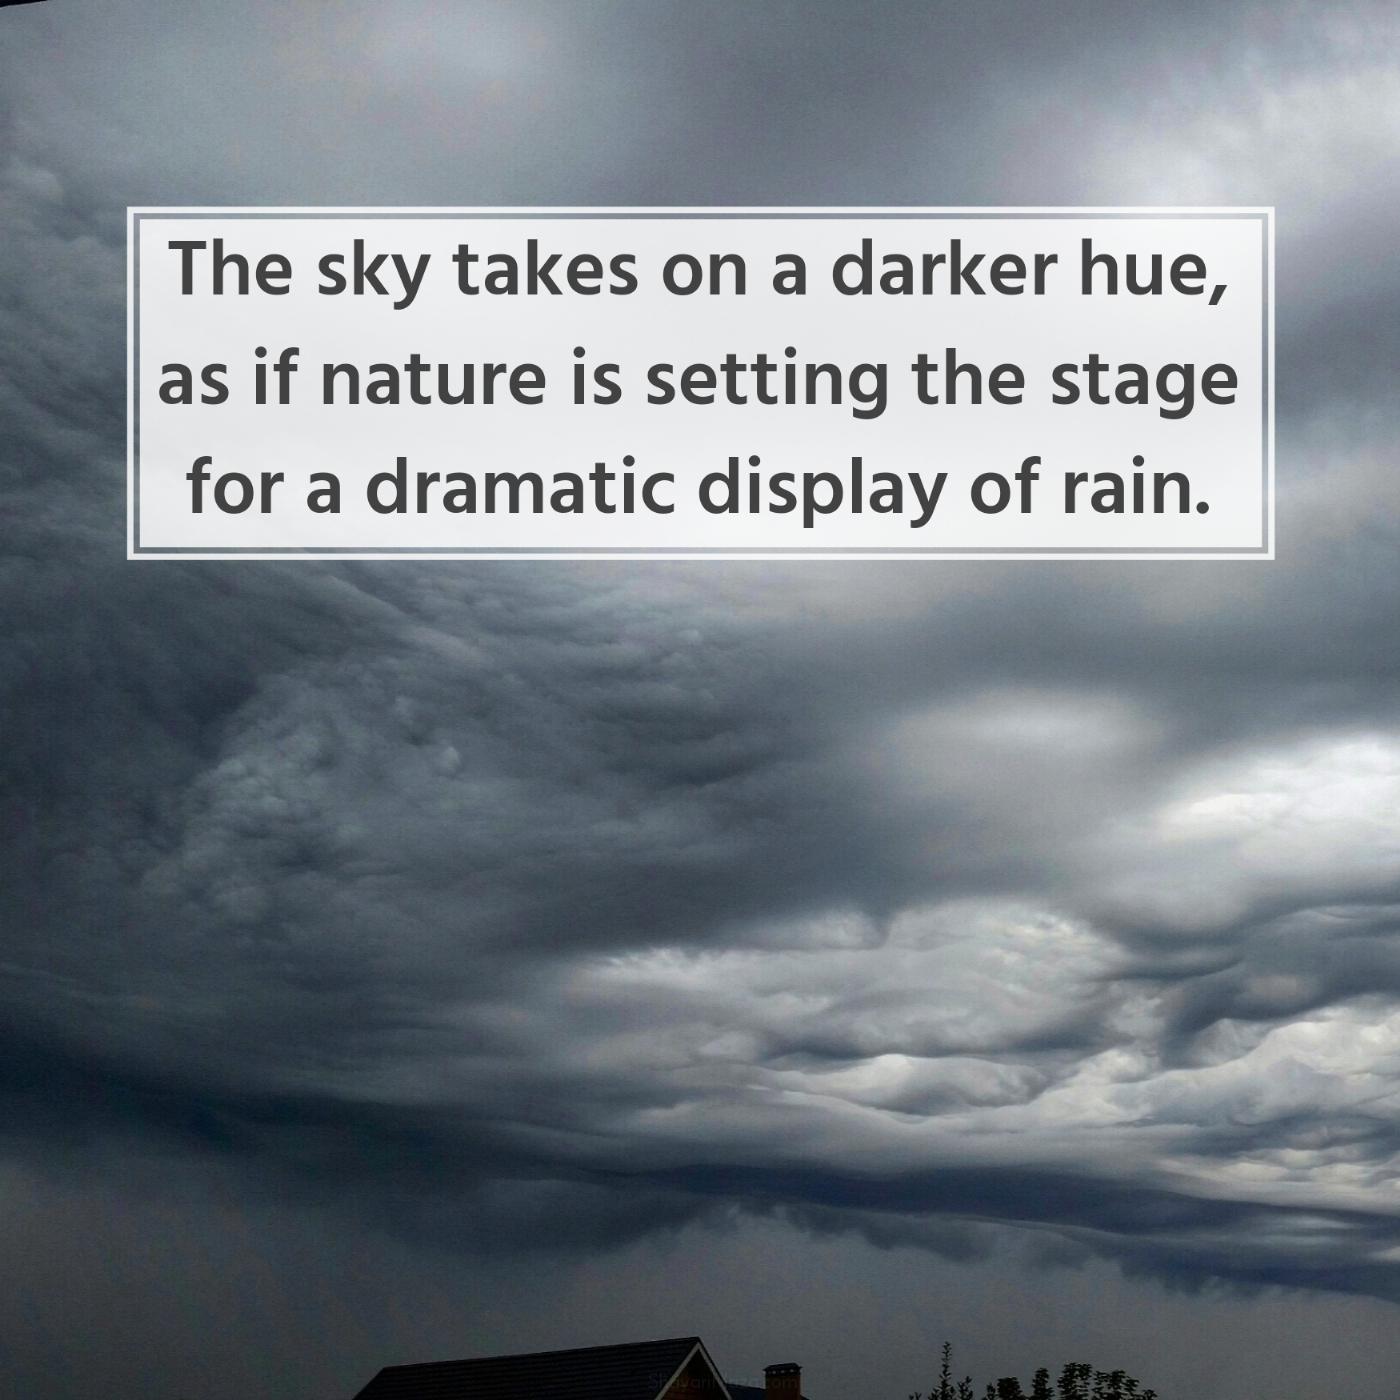 The sky takes on a darker hue as if nature is setting the stage